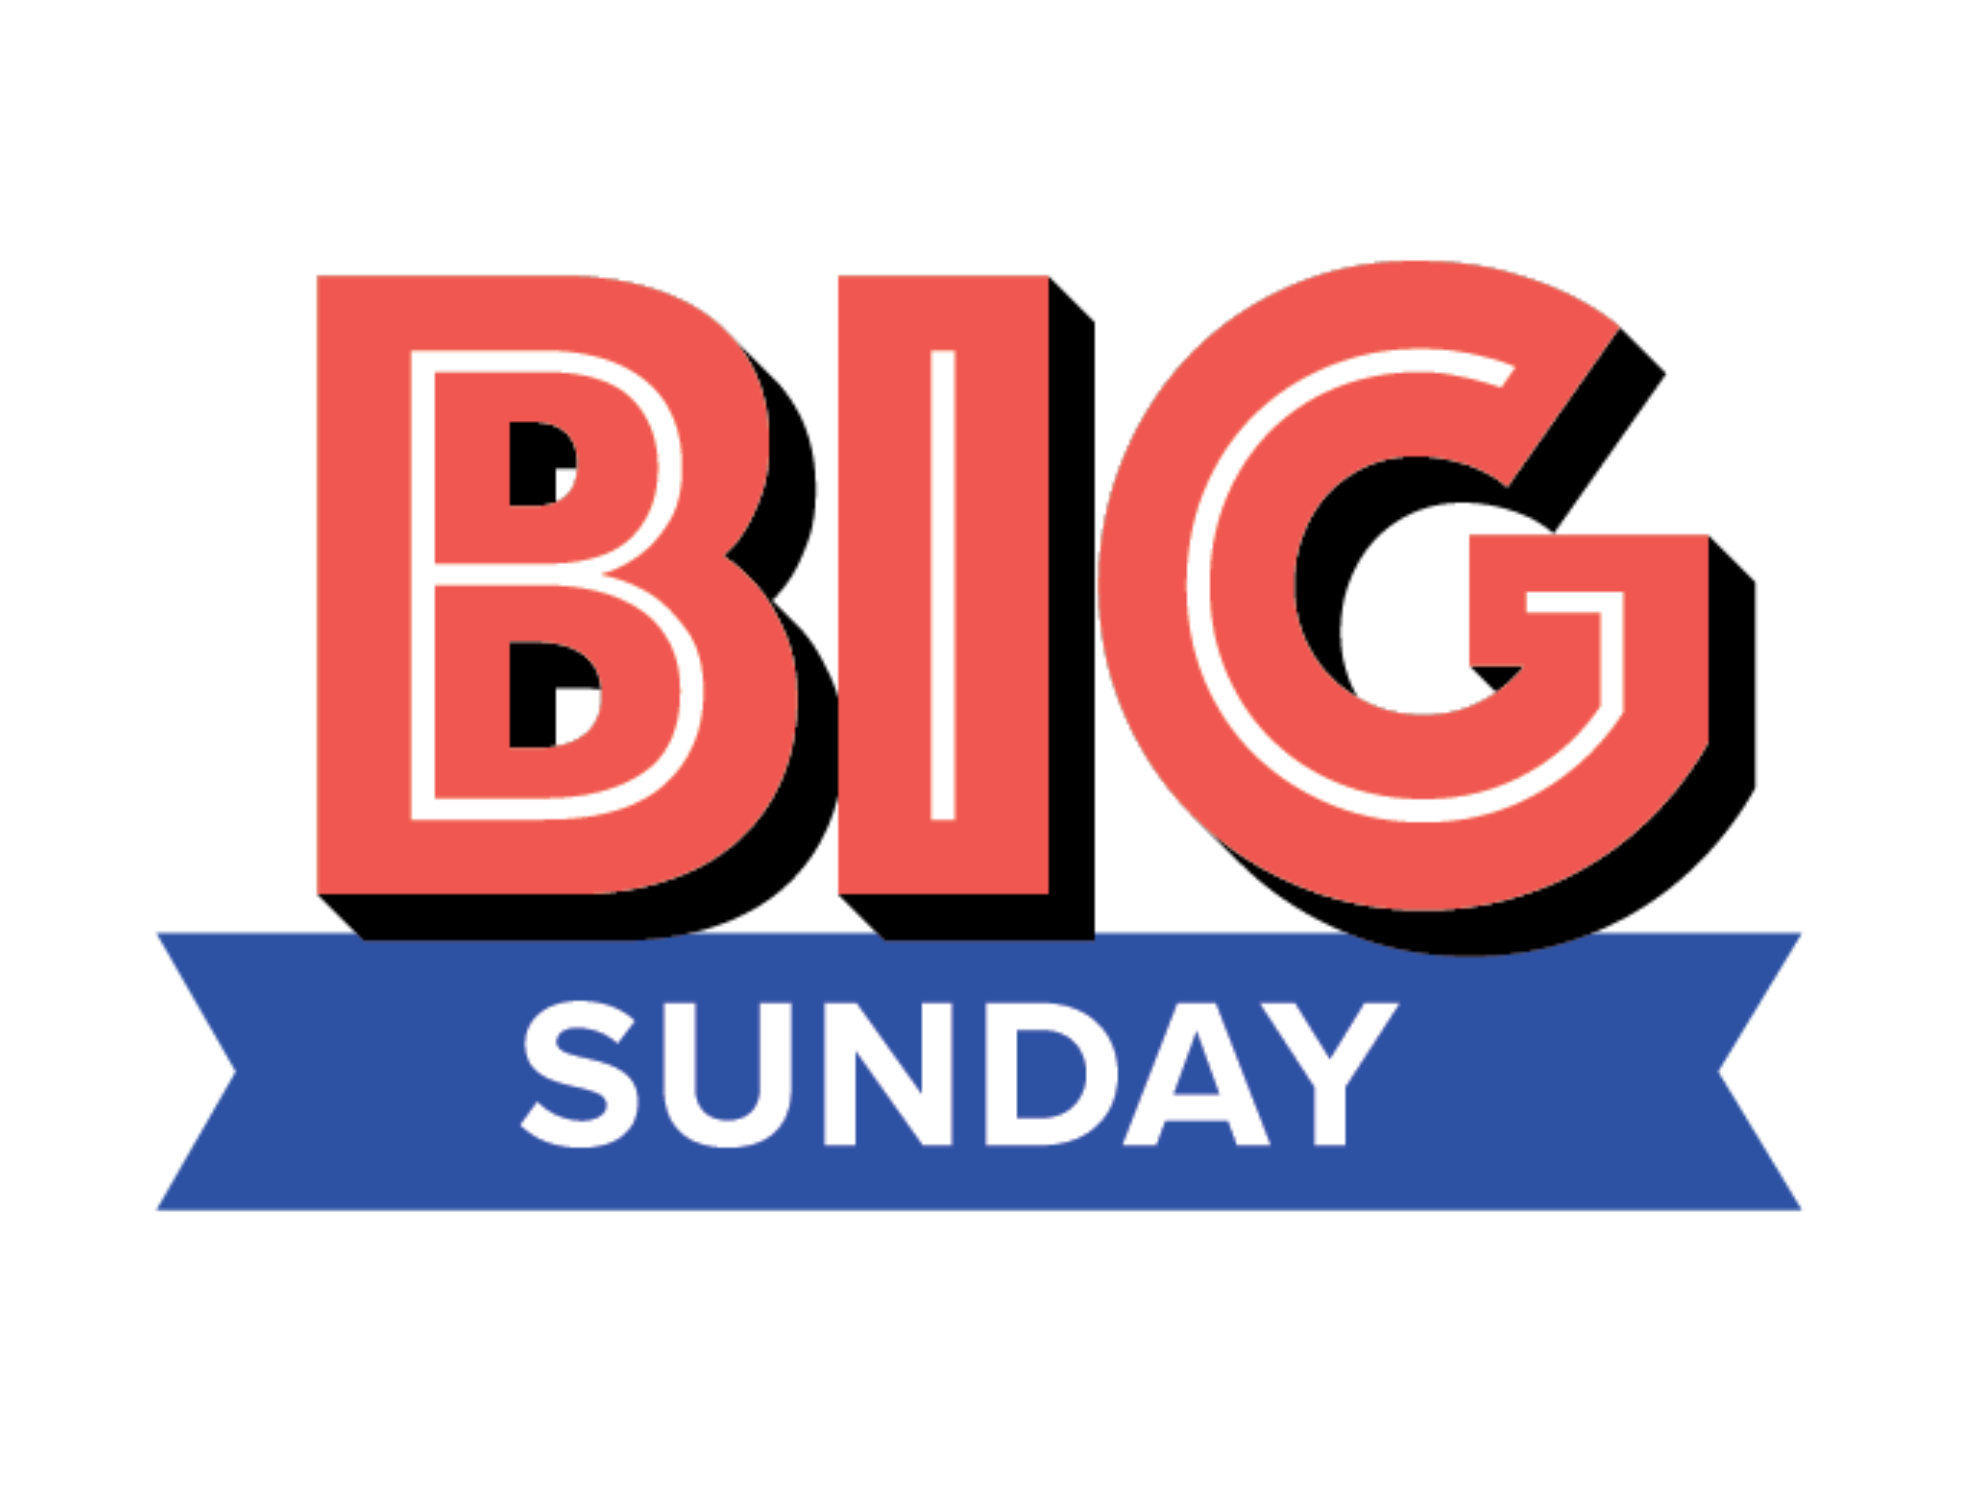 Featured image for “Big Sunday”